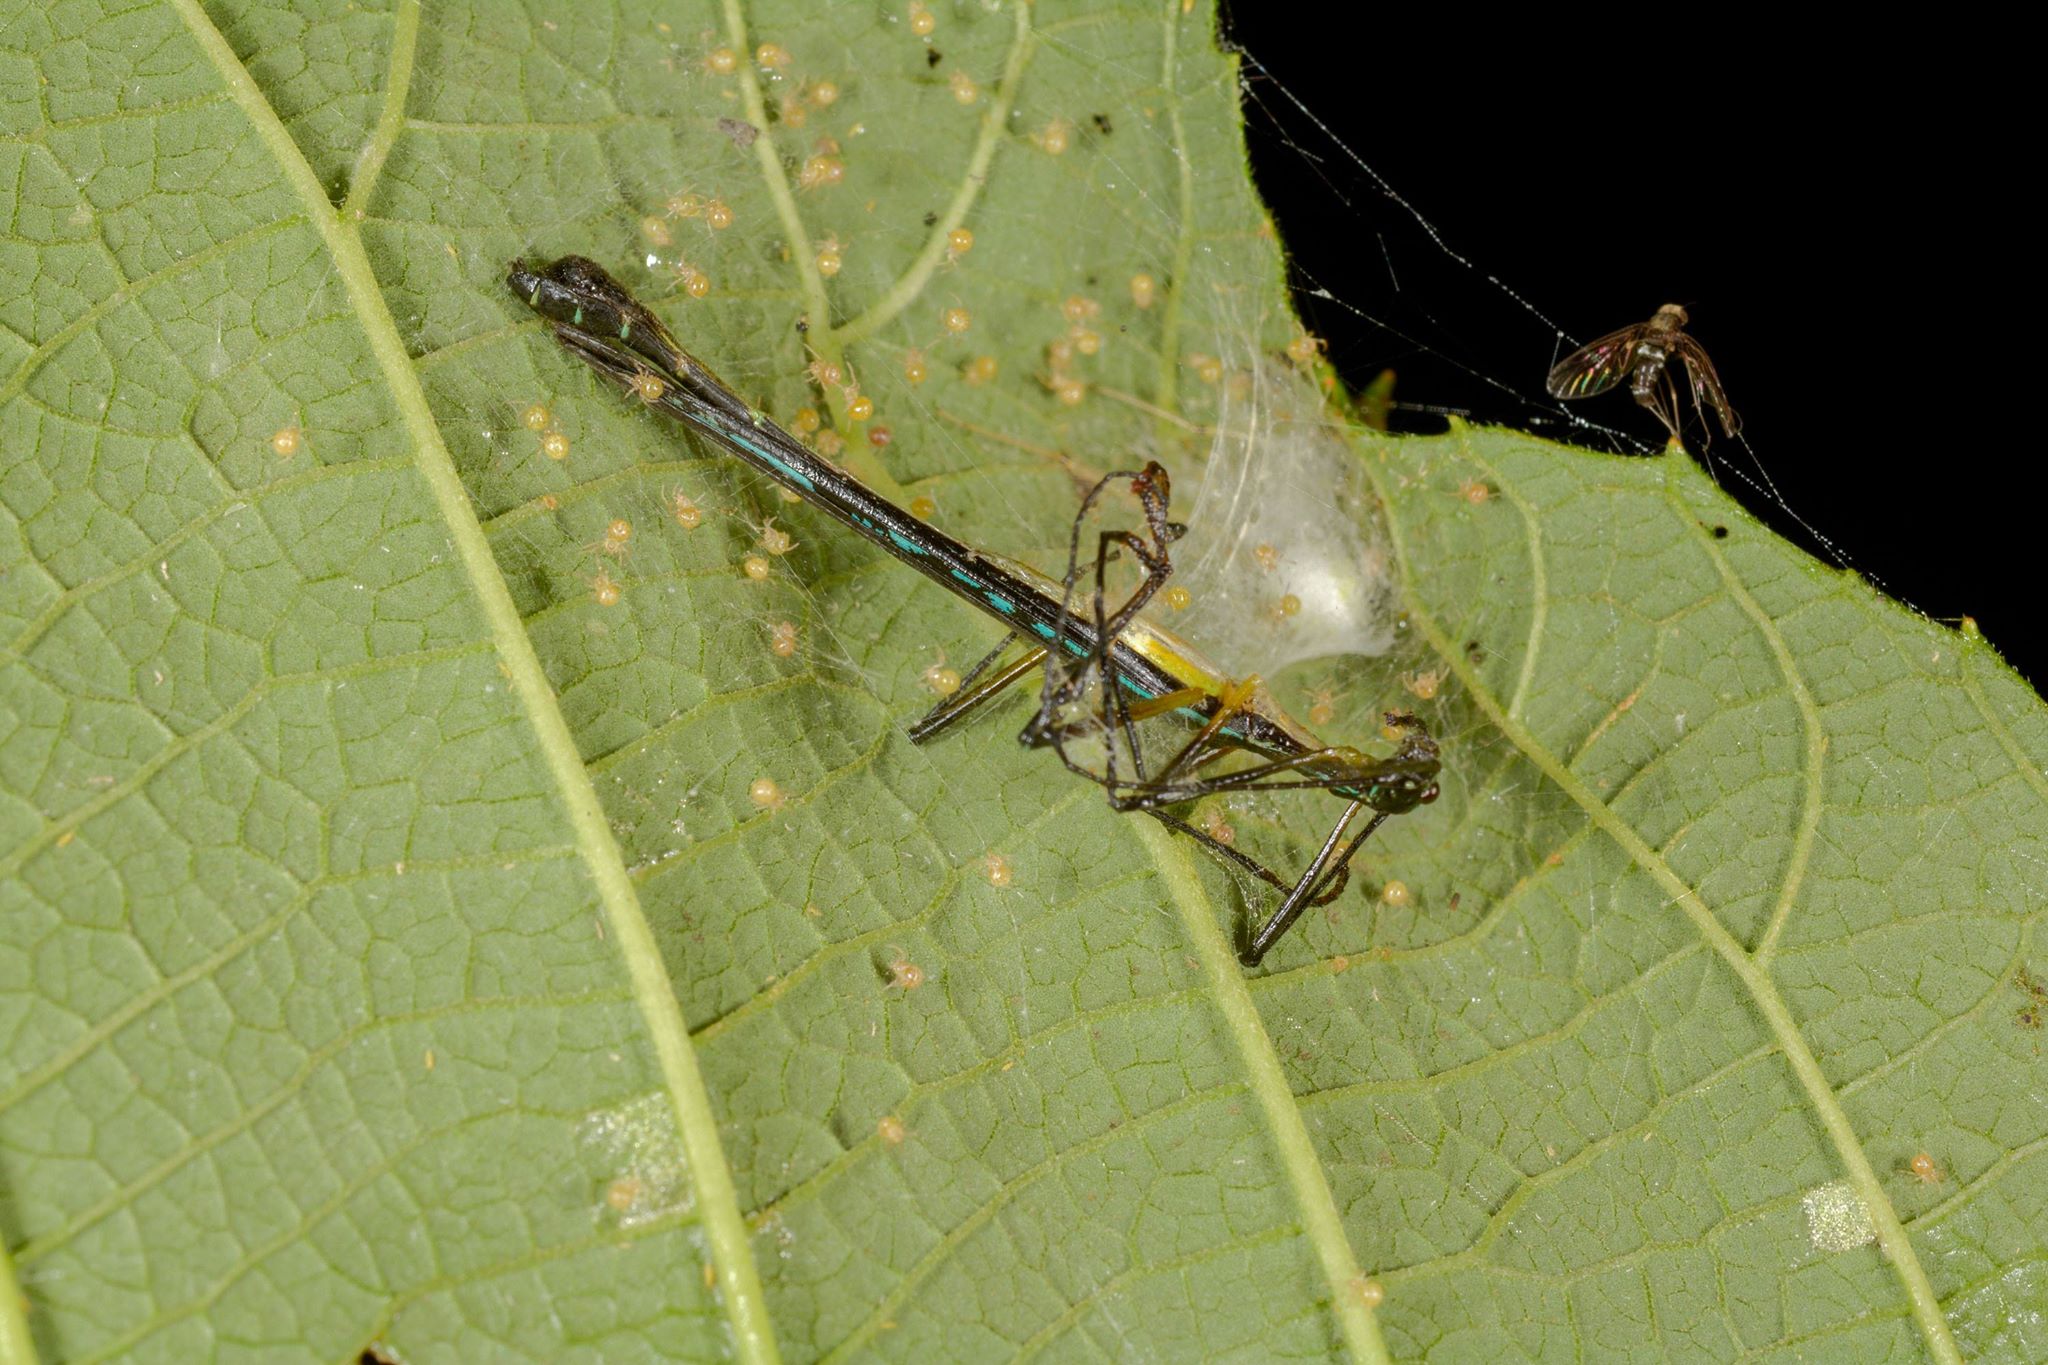 Spiders (Araneae). An adult <i>Parastratocles</i> male got caught up in a spider web in Panama. Looks like he is the first meal of the spiderlings. © Pablo Valero